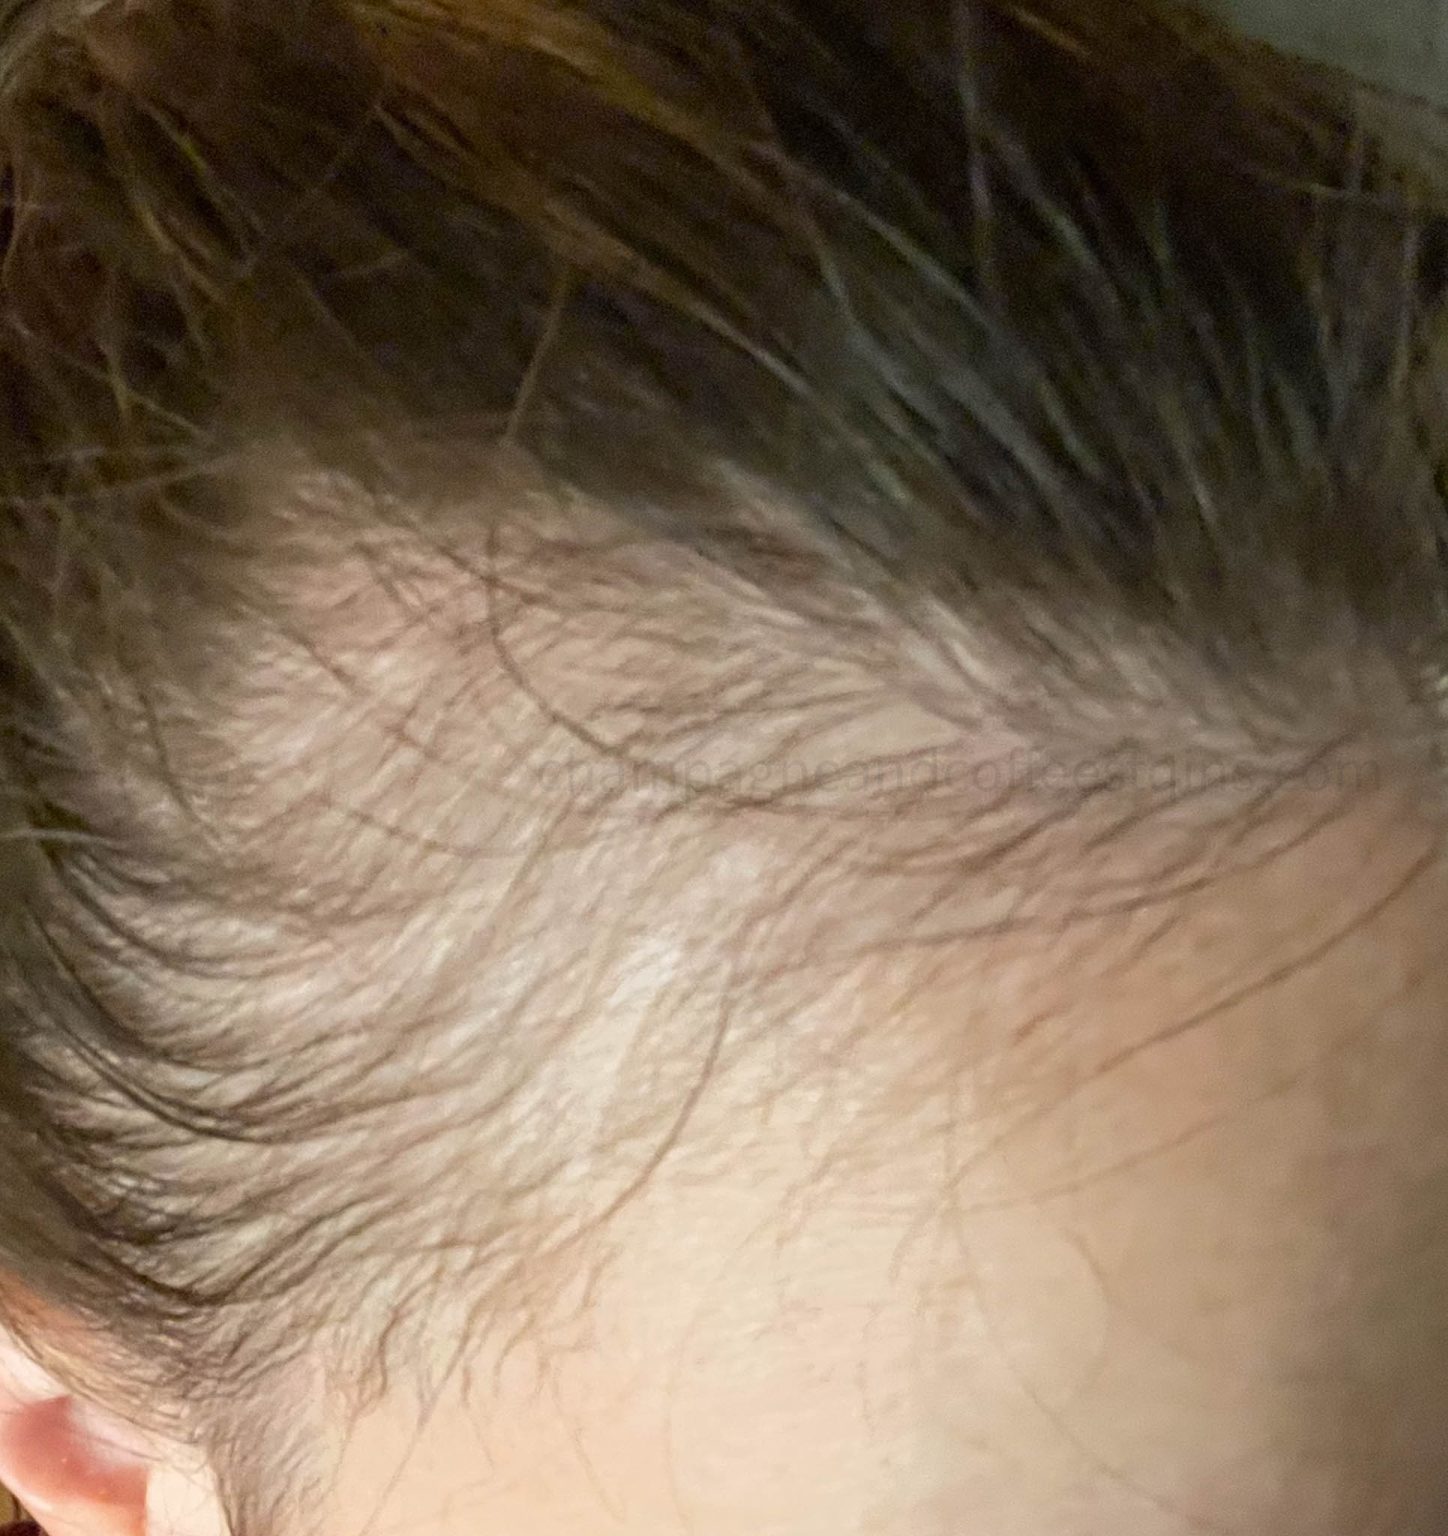 I Tried Divi Hair Serum for 4 Months and Here's What Happened (with pics)